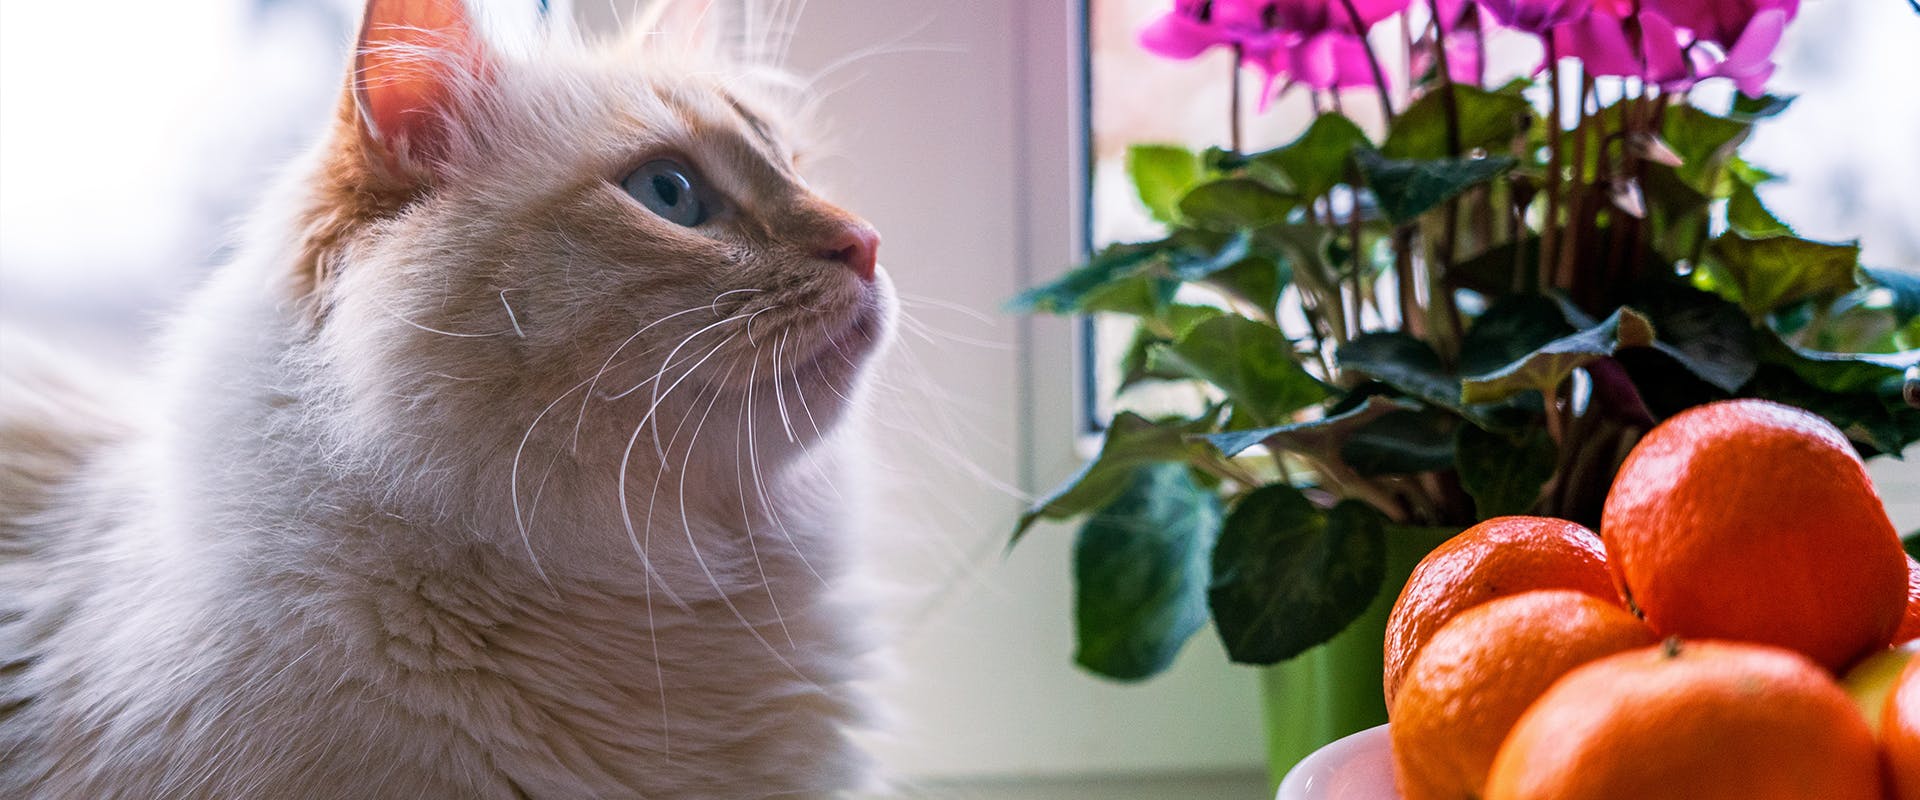 A fluffy white cat sitting on a windowsill, to the right is a bright purple plant and a bowl of oranges